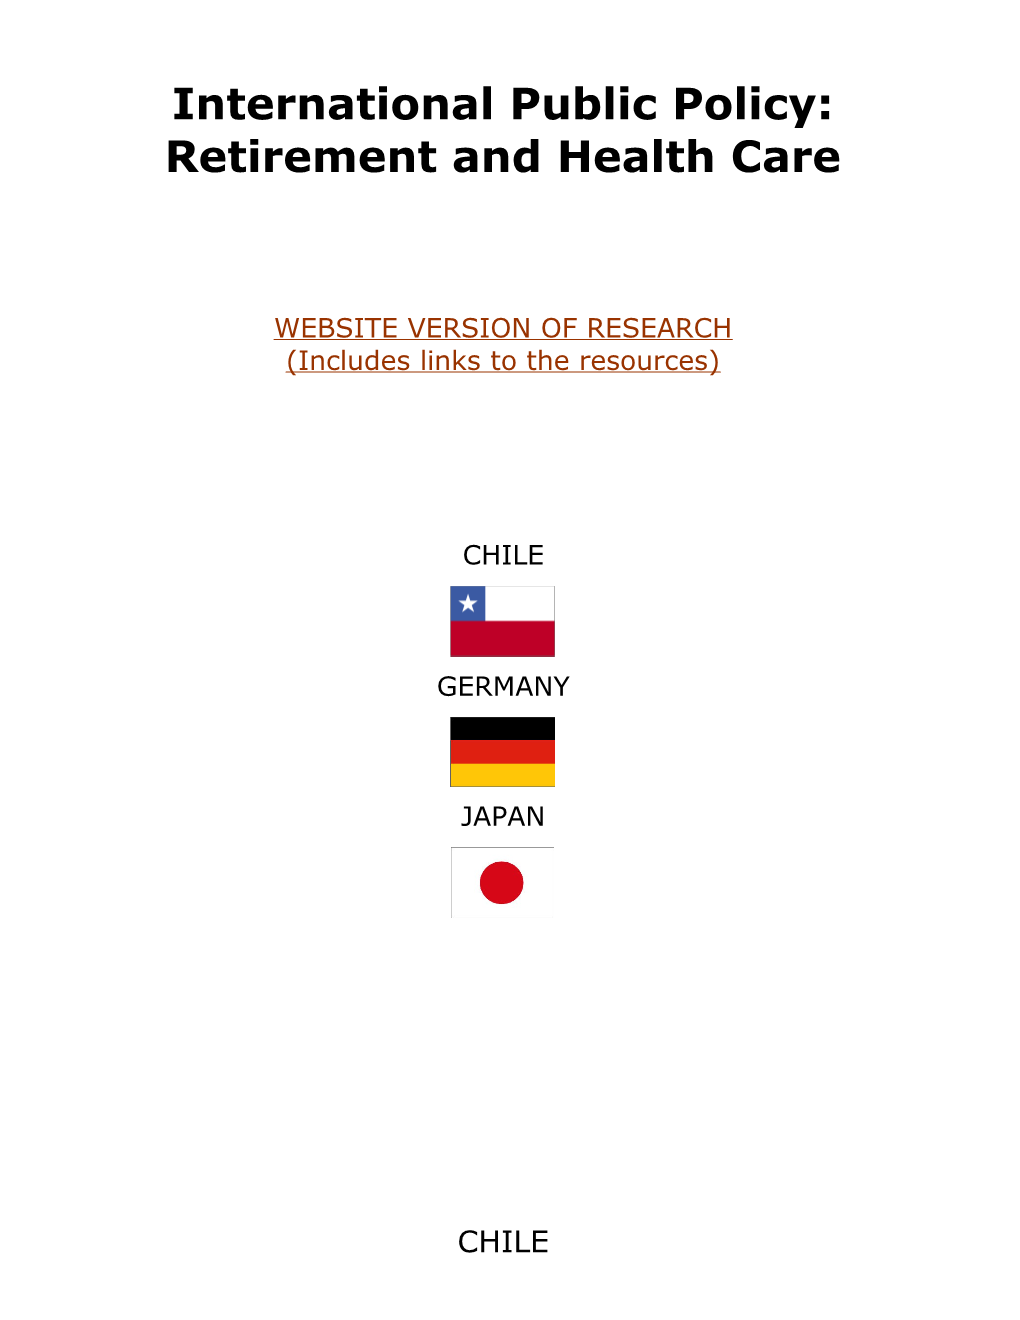 Retirement and Health Care